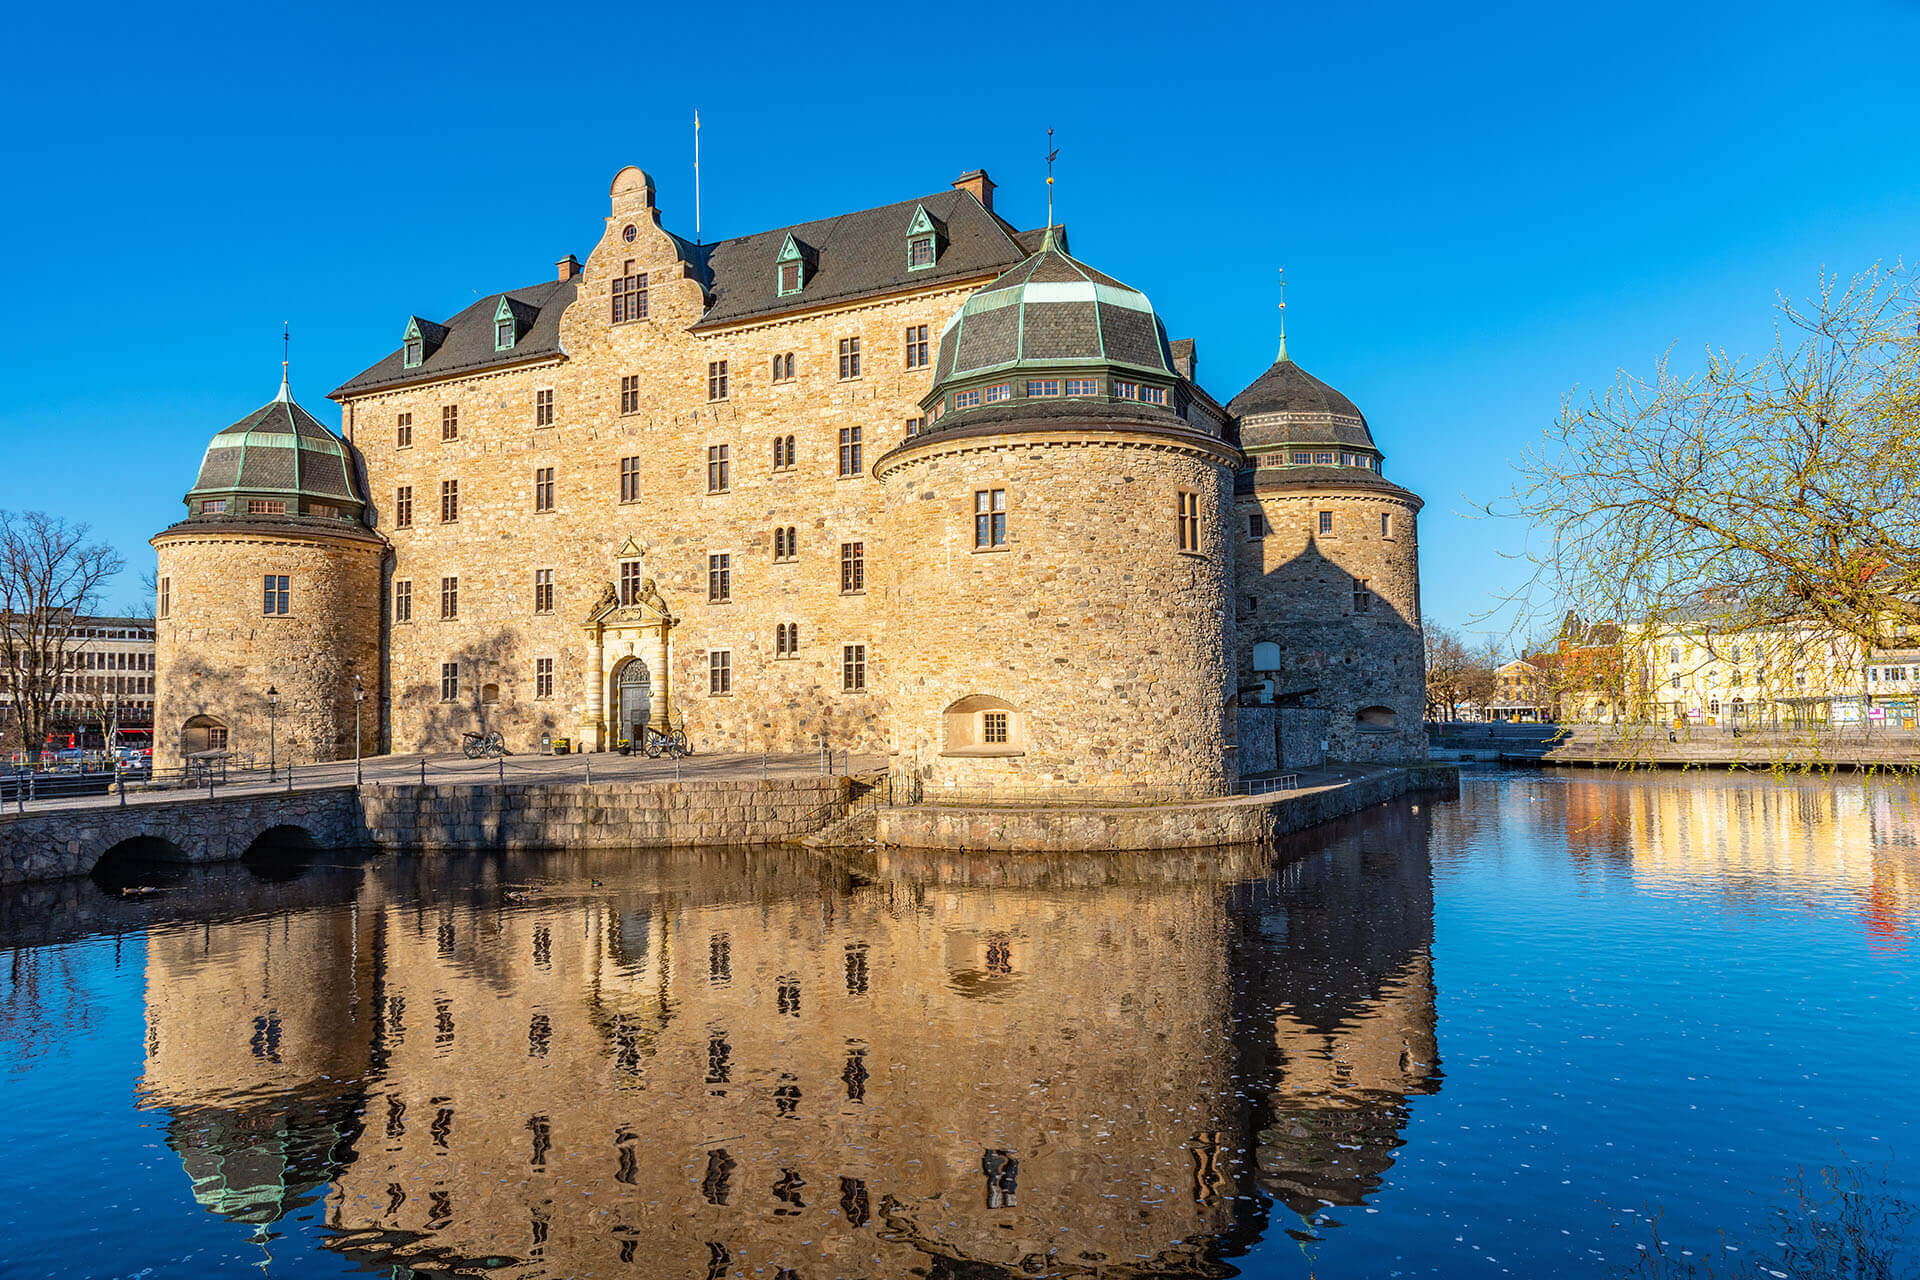 Sweden: COVID-19 Entry Bans Extended for All Travelers